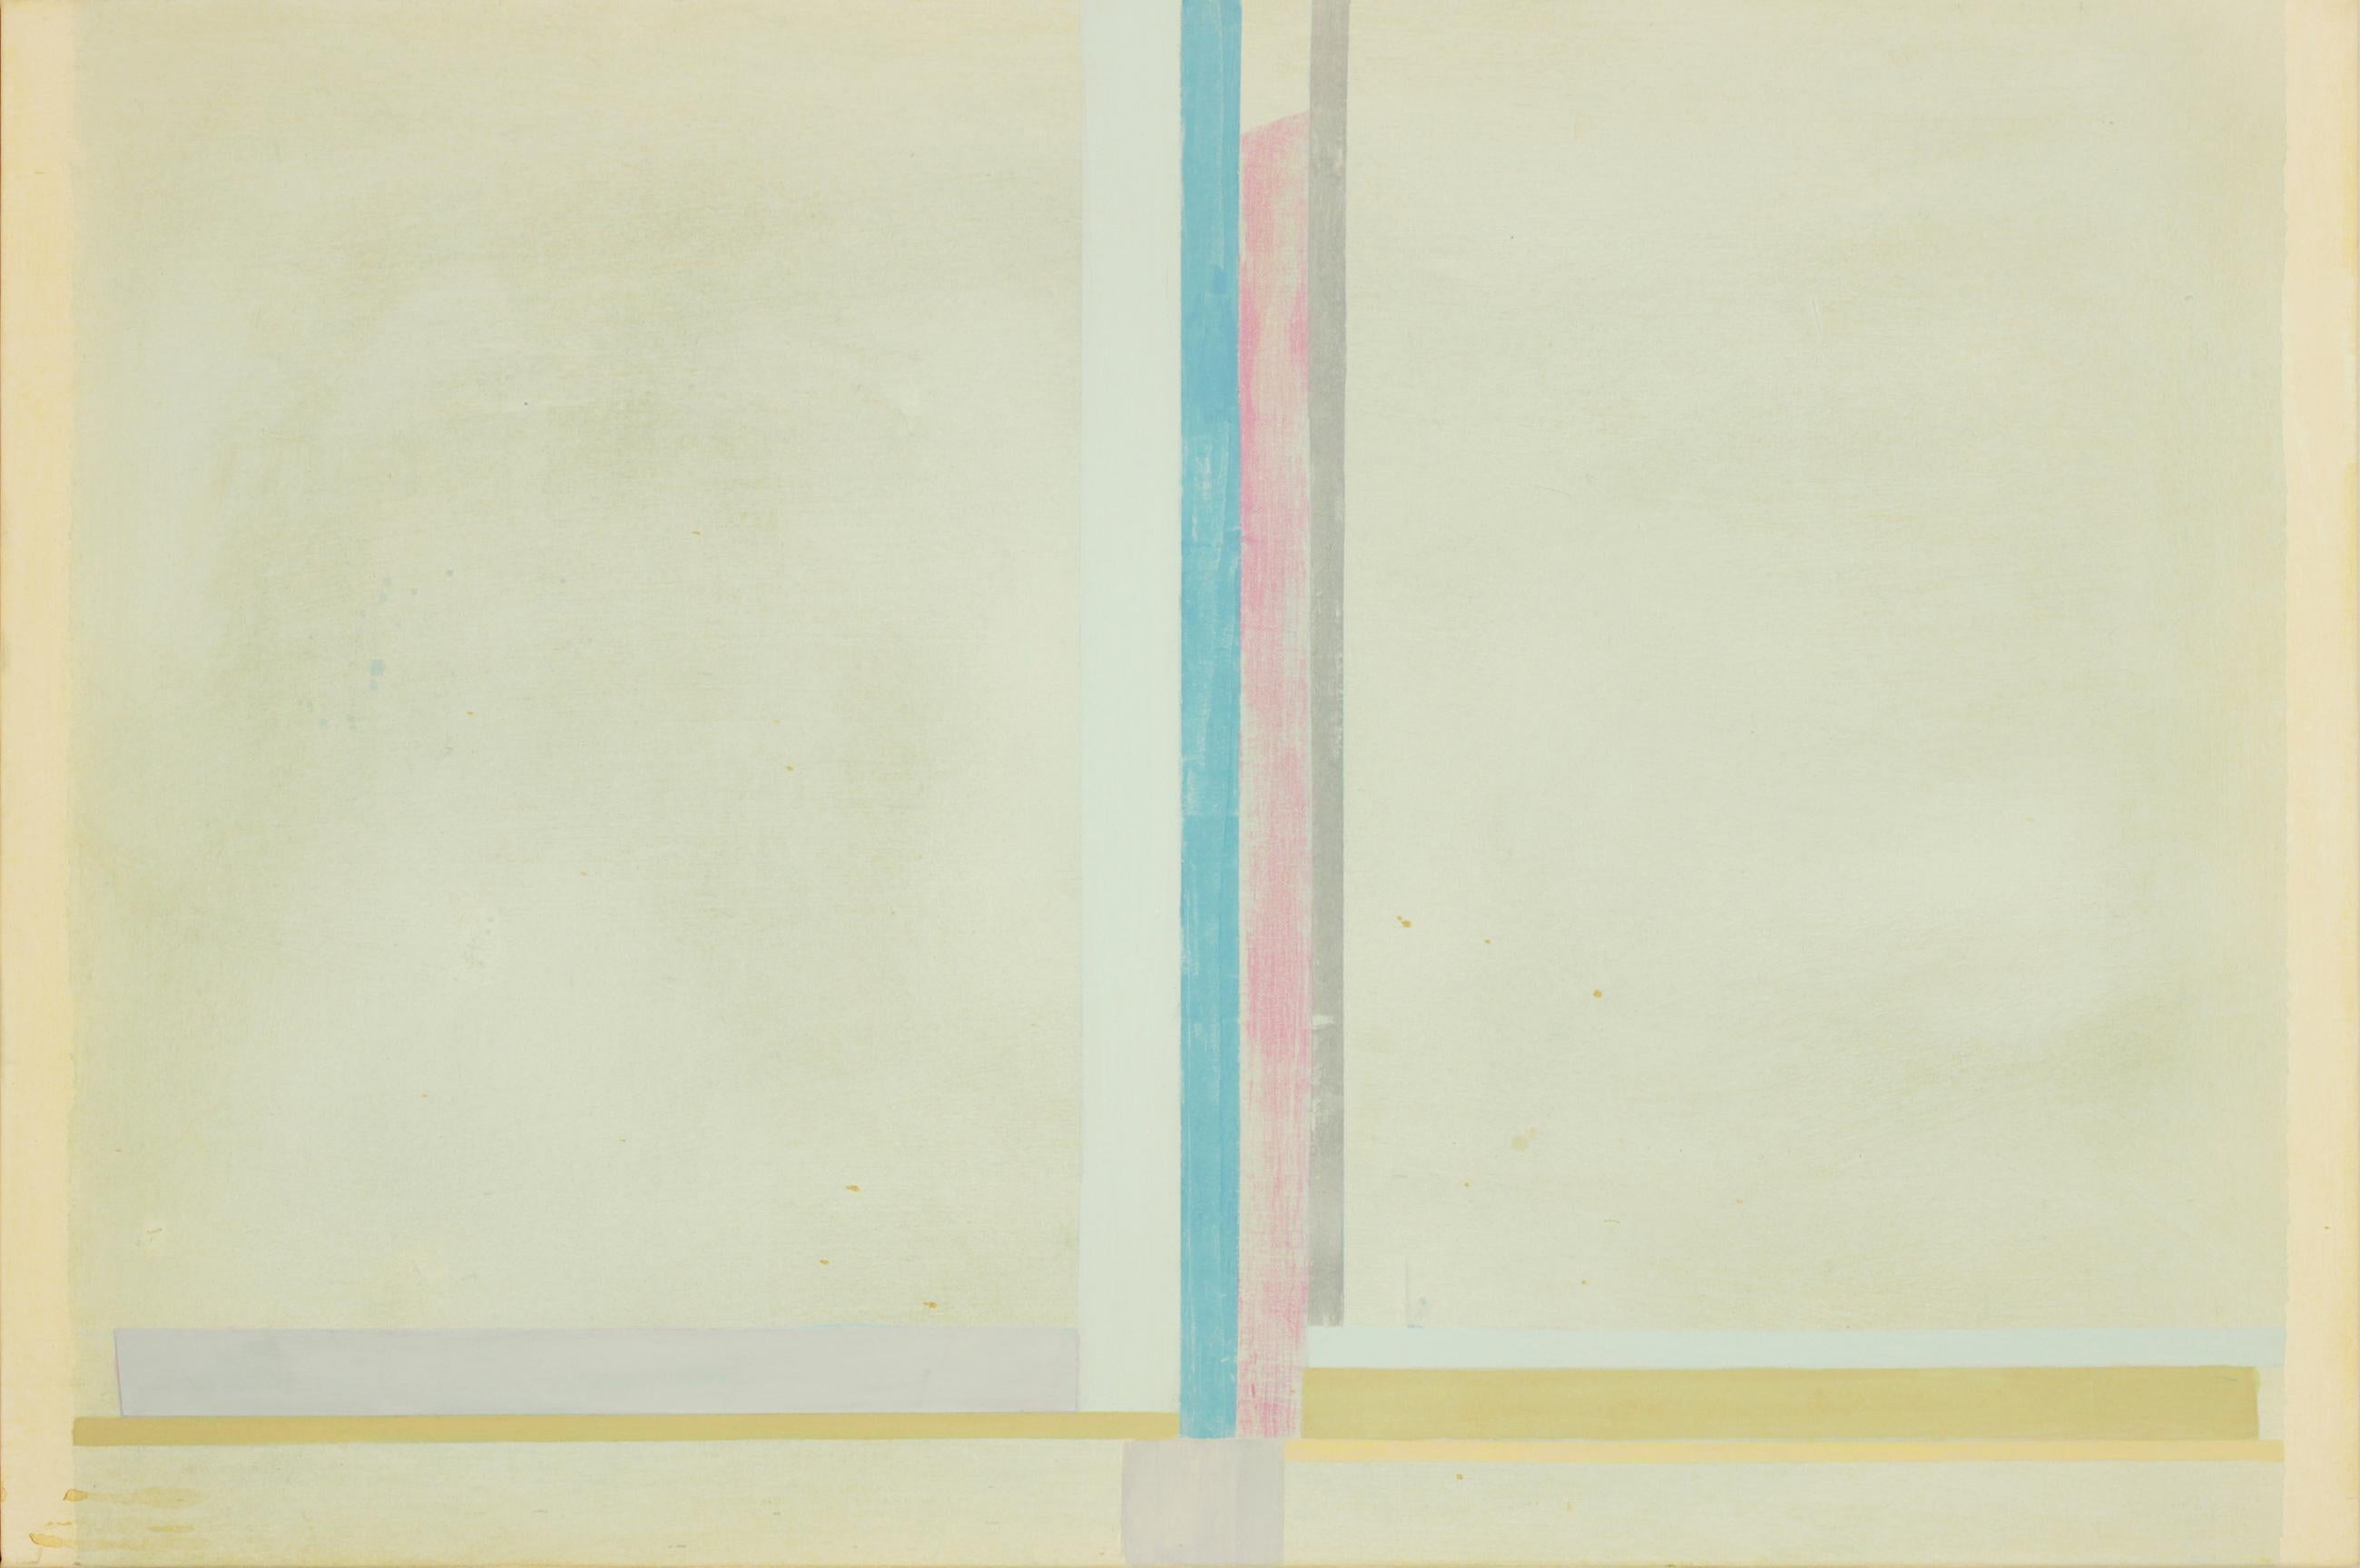 In this abstract painting in acrylic on canvas by Elizabeth Gourlay, clean and precise, carefully ordered stripes and blocks of color in yellow, light pink and light blue, pale ochre, beige and gray lines are lively against the pale sage green